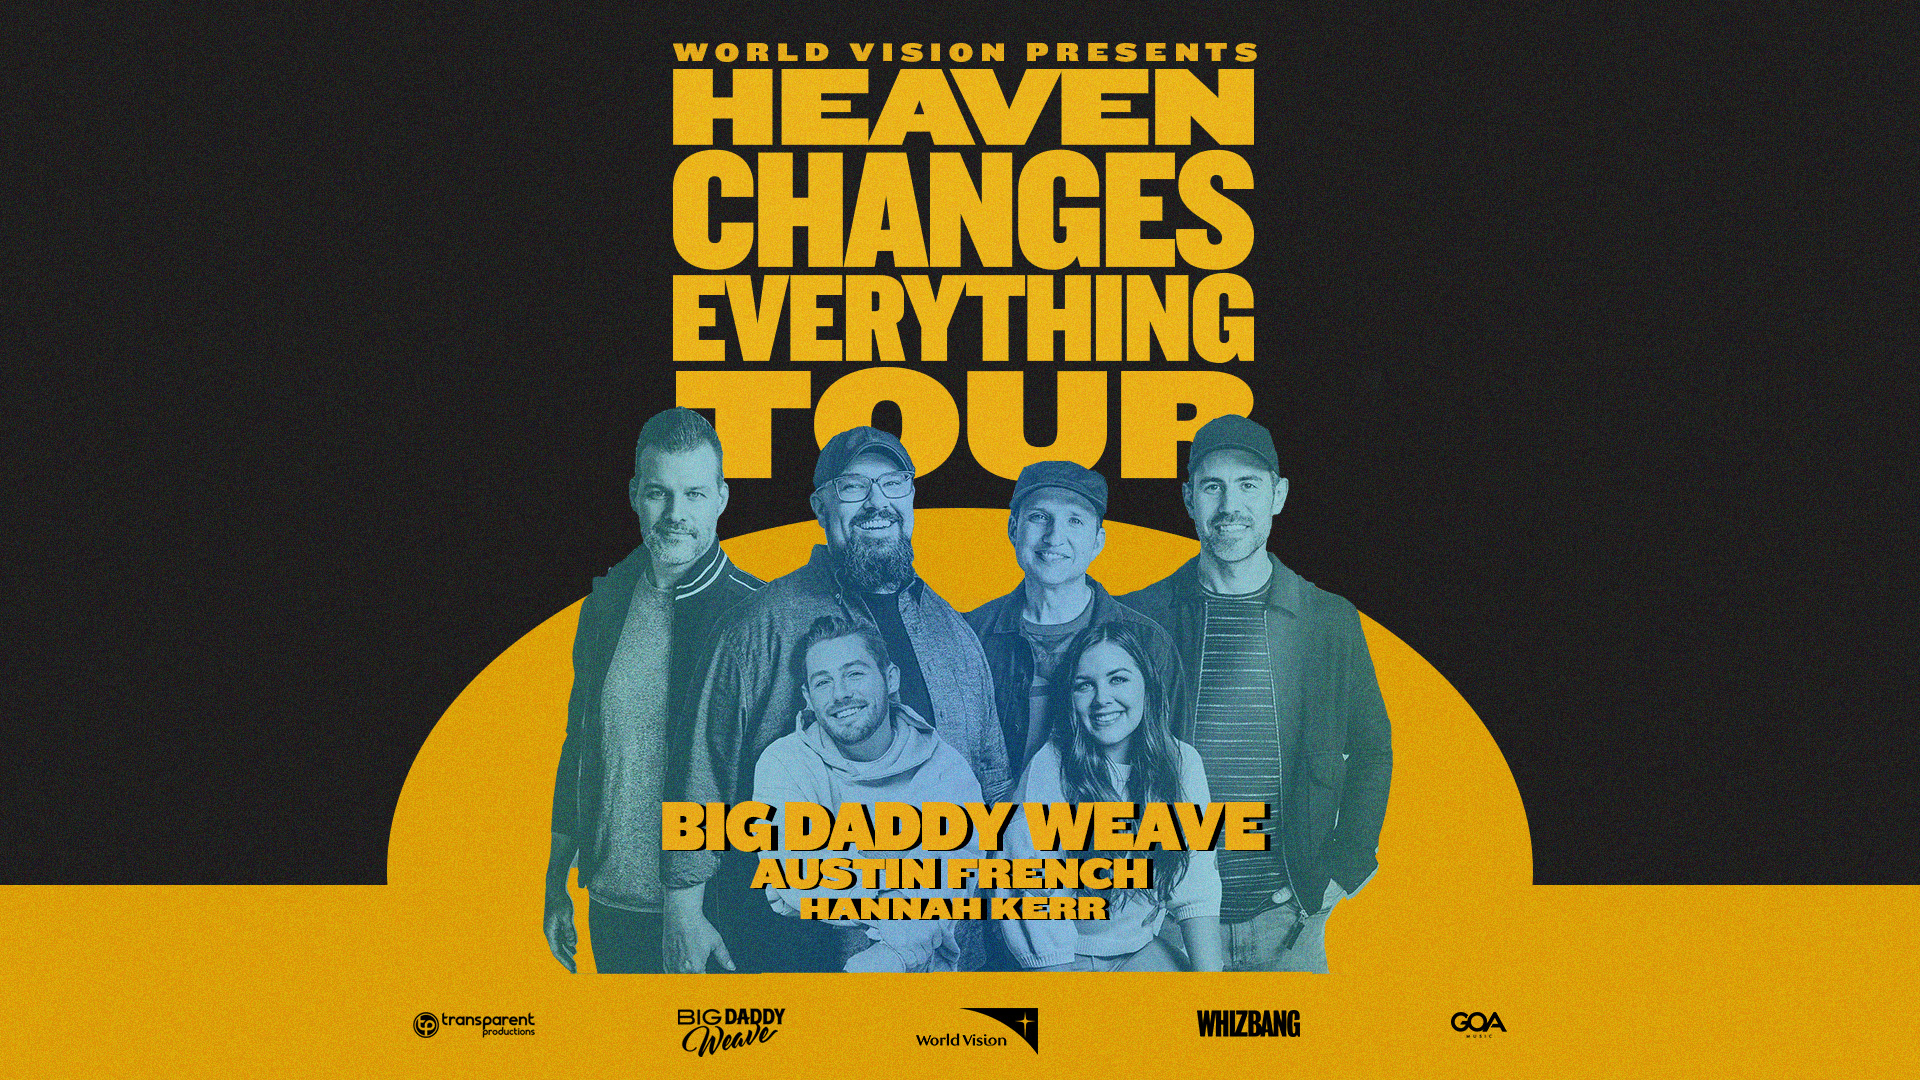 Big Daddy Weave Heaven Changes Everything Tour Austin, TX March